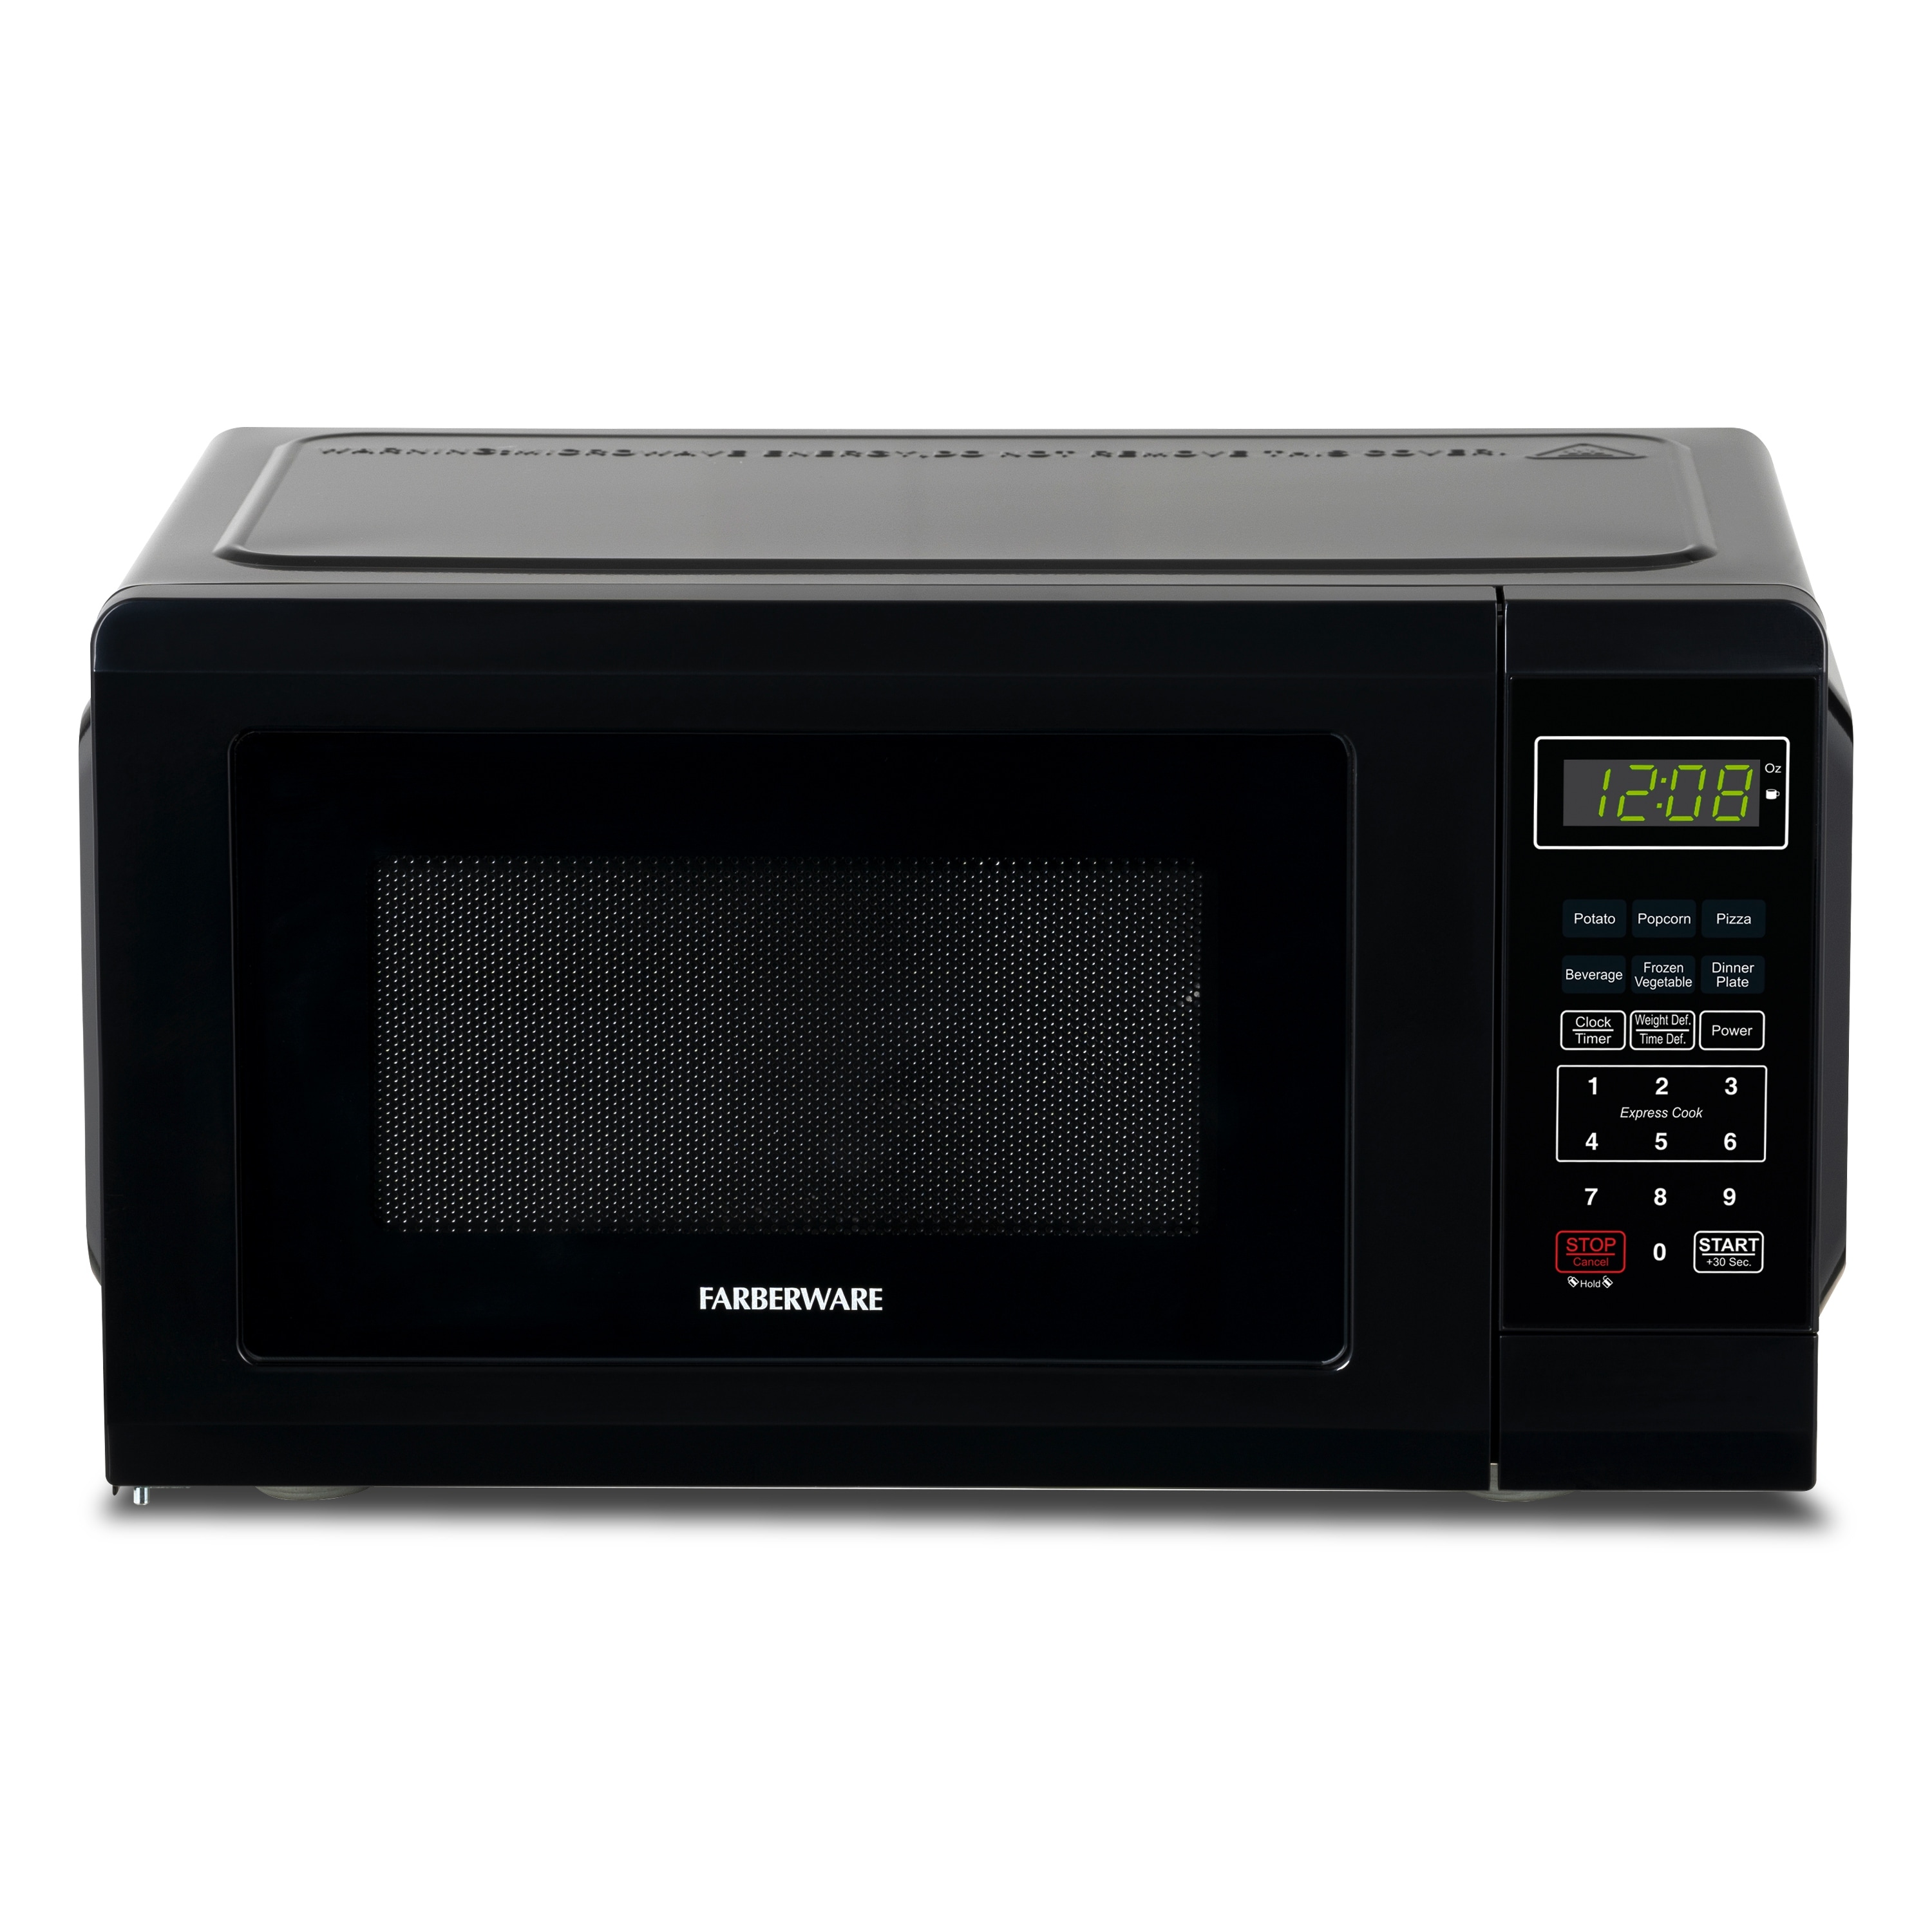 https://ak1.ostkcdn.com/images/products/is/images/direct/879c3d63d1ead56b9bc73a3cb3c3a592c69cfd22/0.7-Cu-Ft-700-Watt-Microwave-Oven%2C-Black.jpg